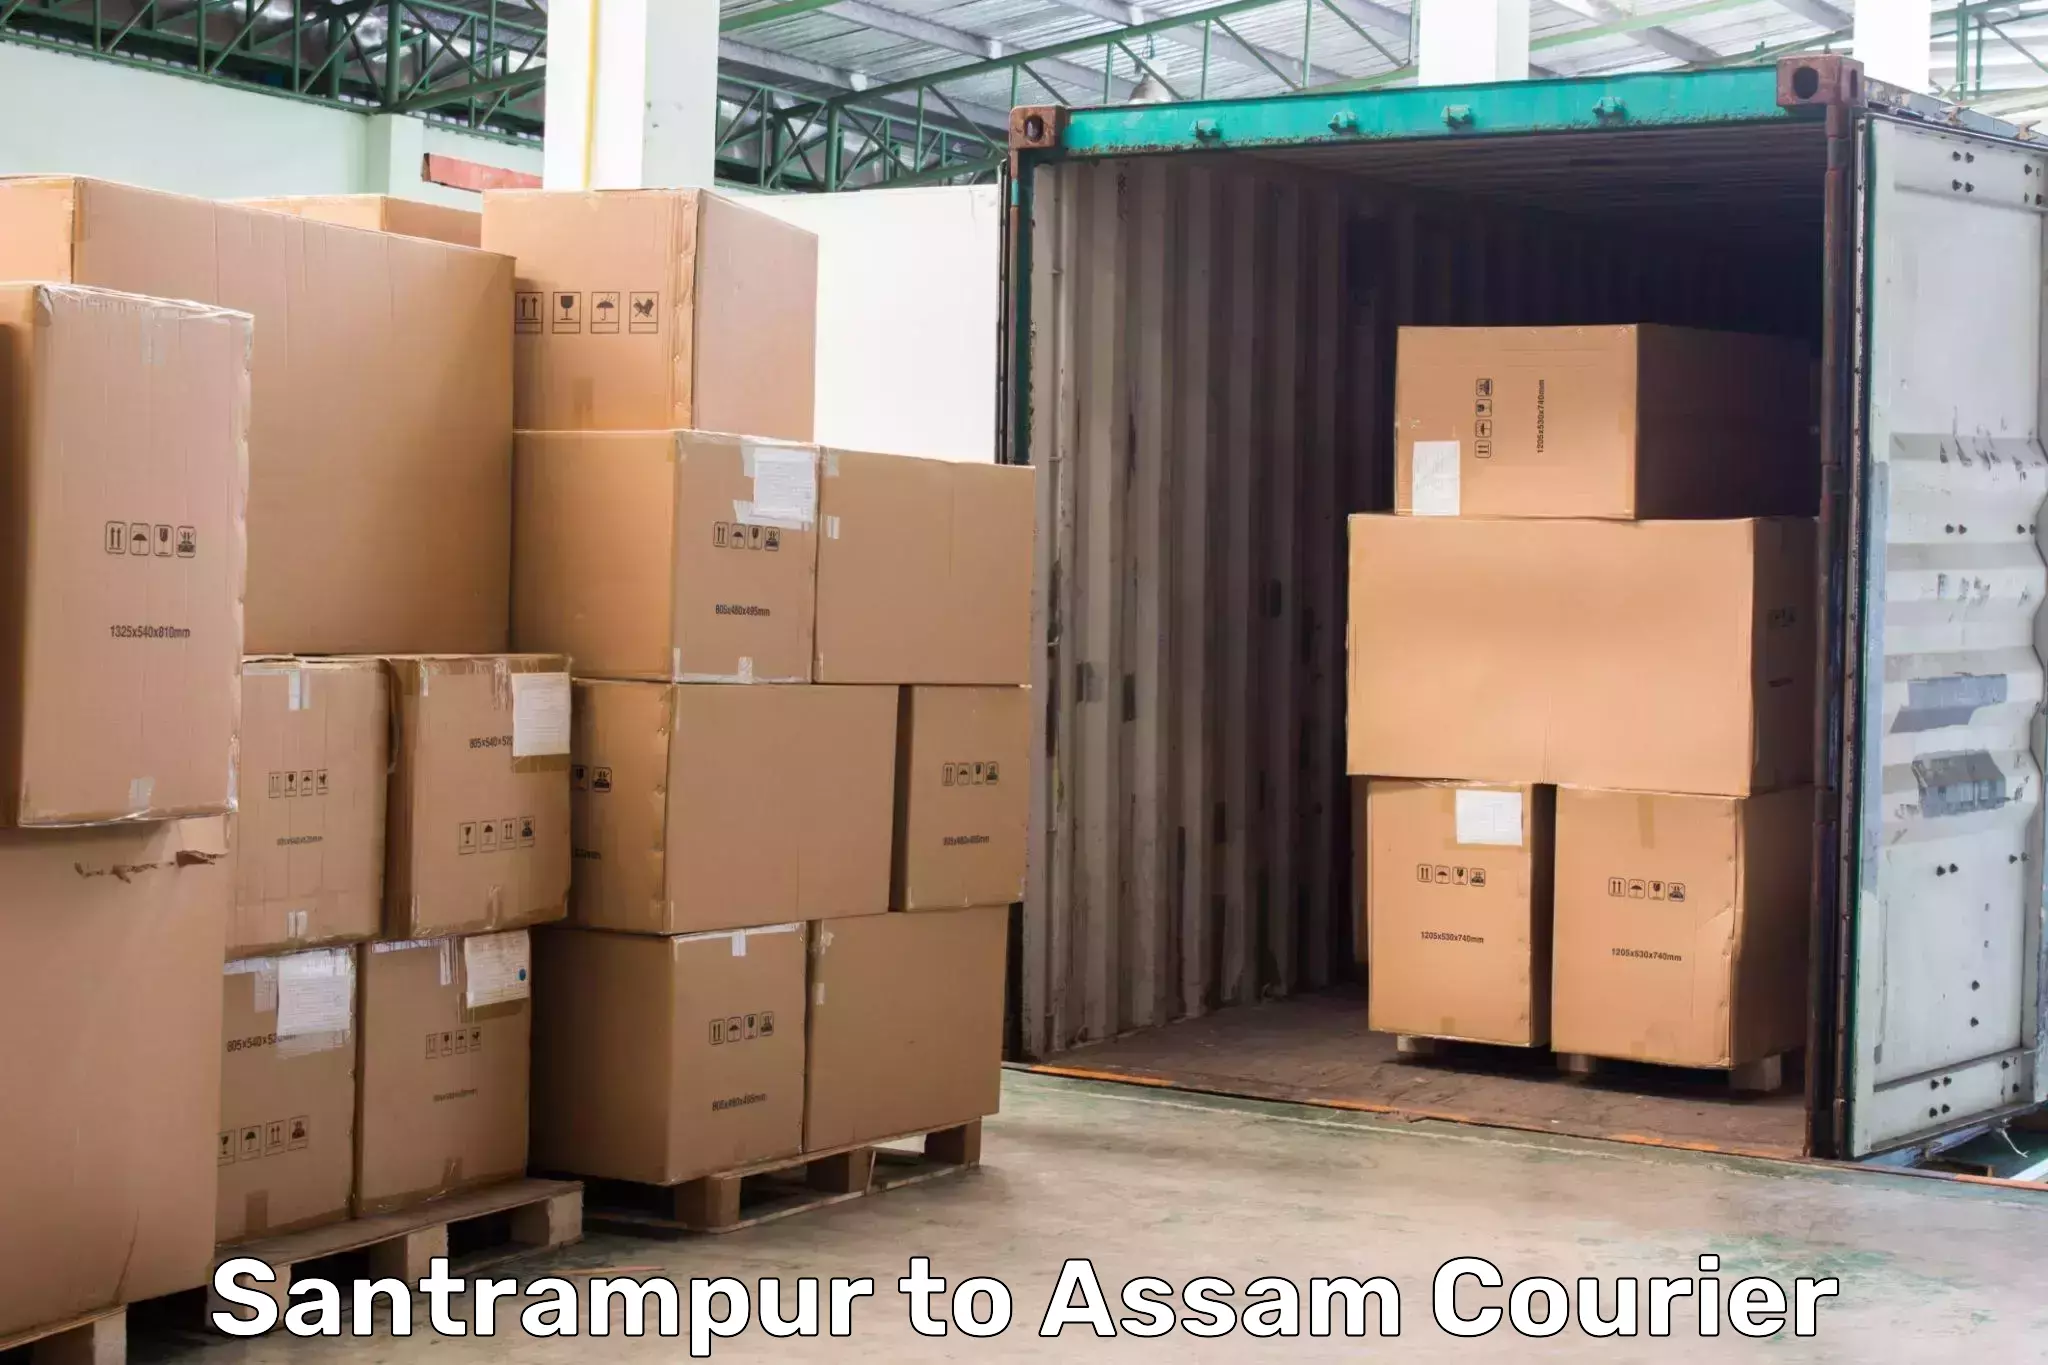 Local courier options Santrampur to Golakganj